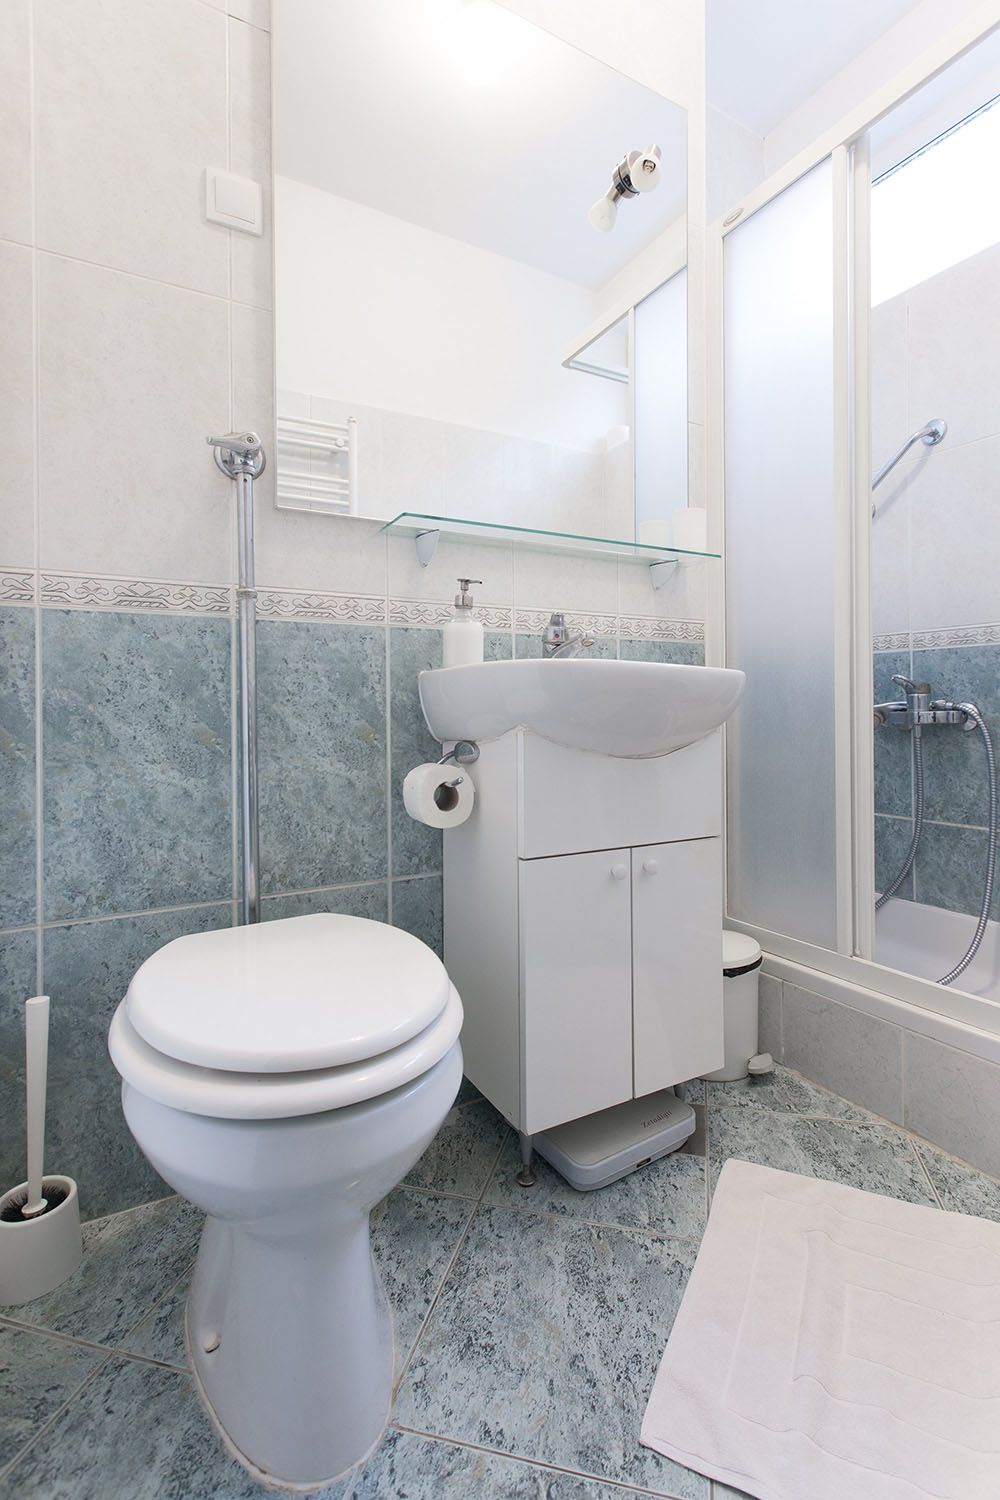 Bathroom with shower, washing machine, sink and toilet.